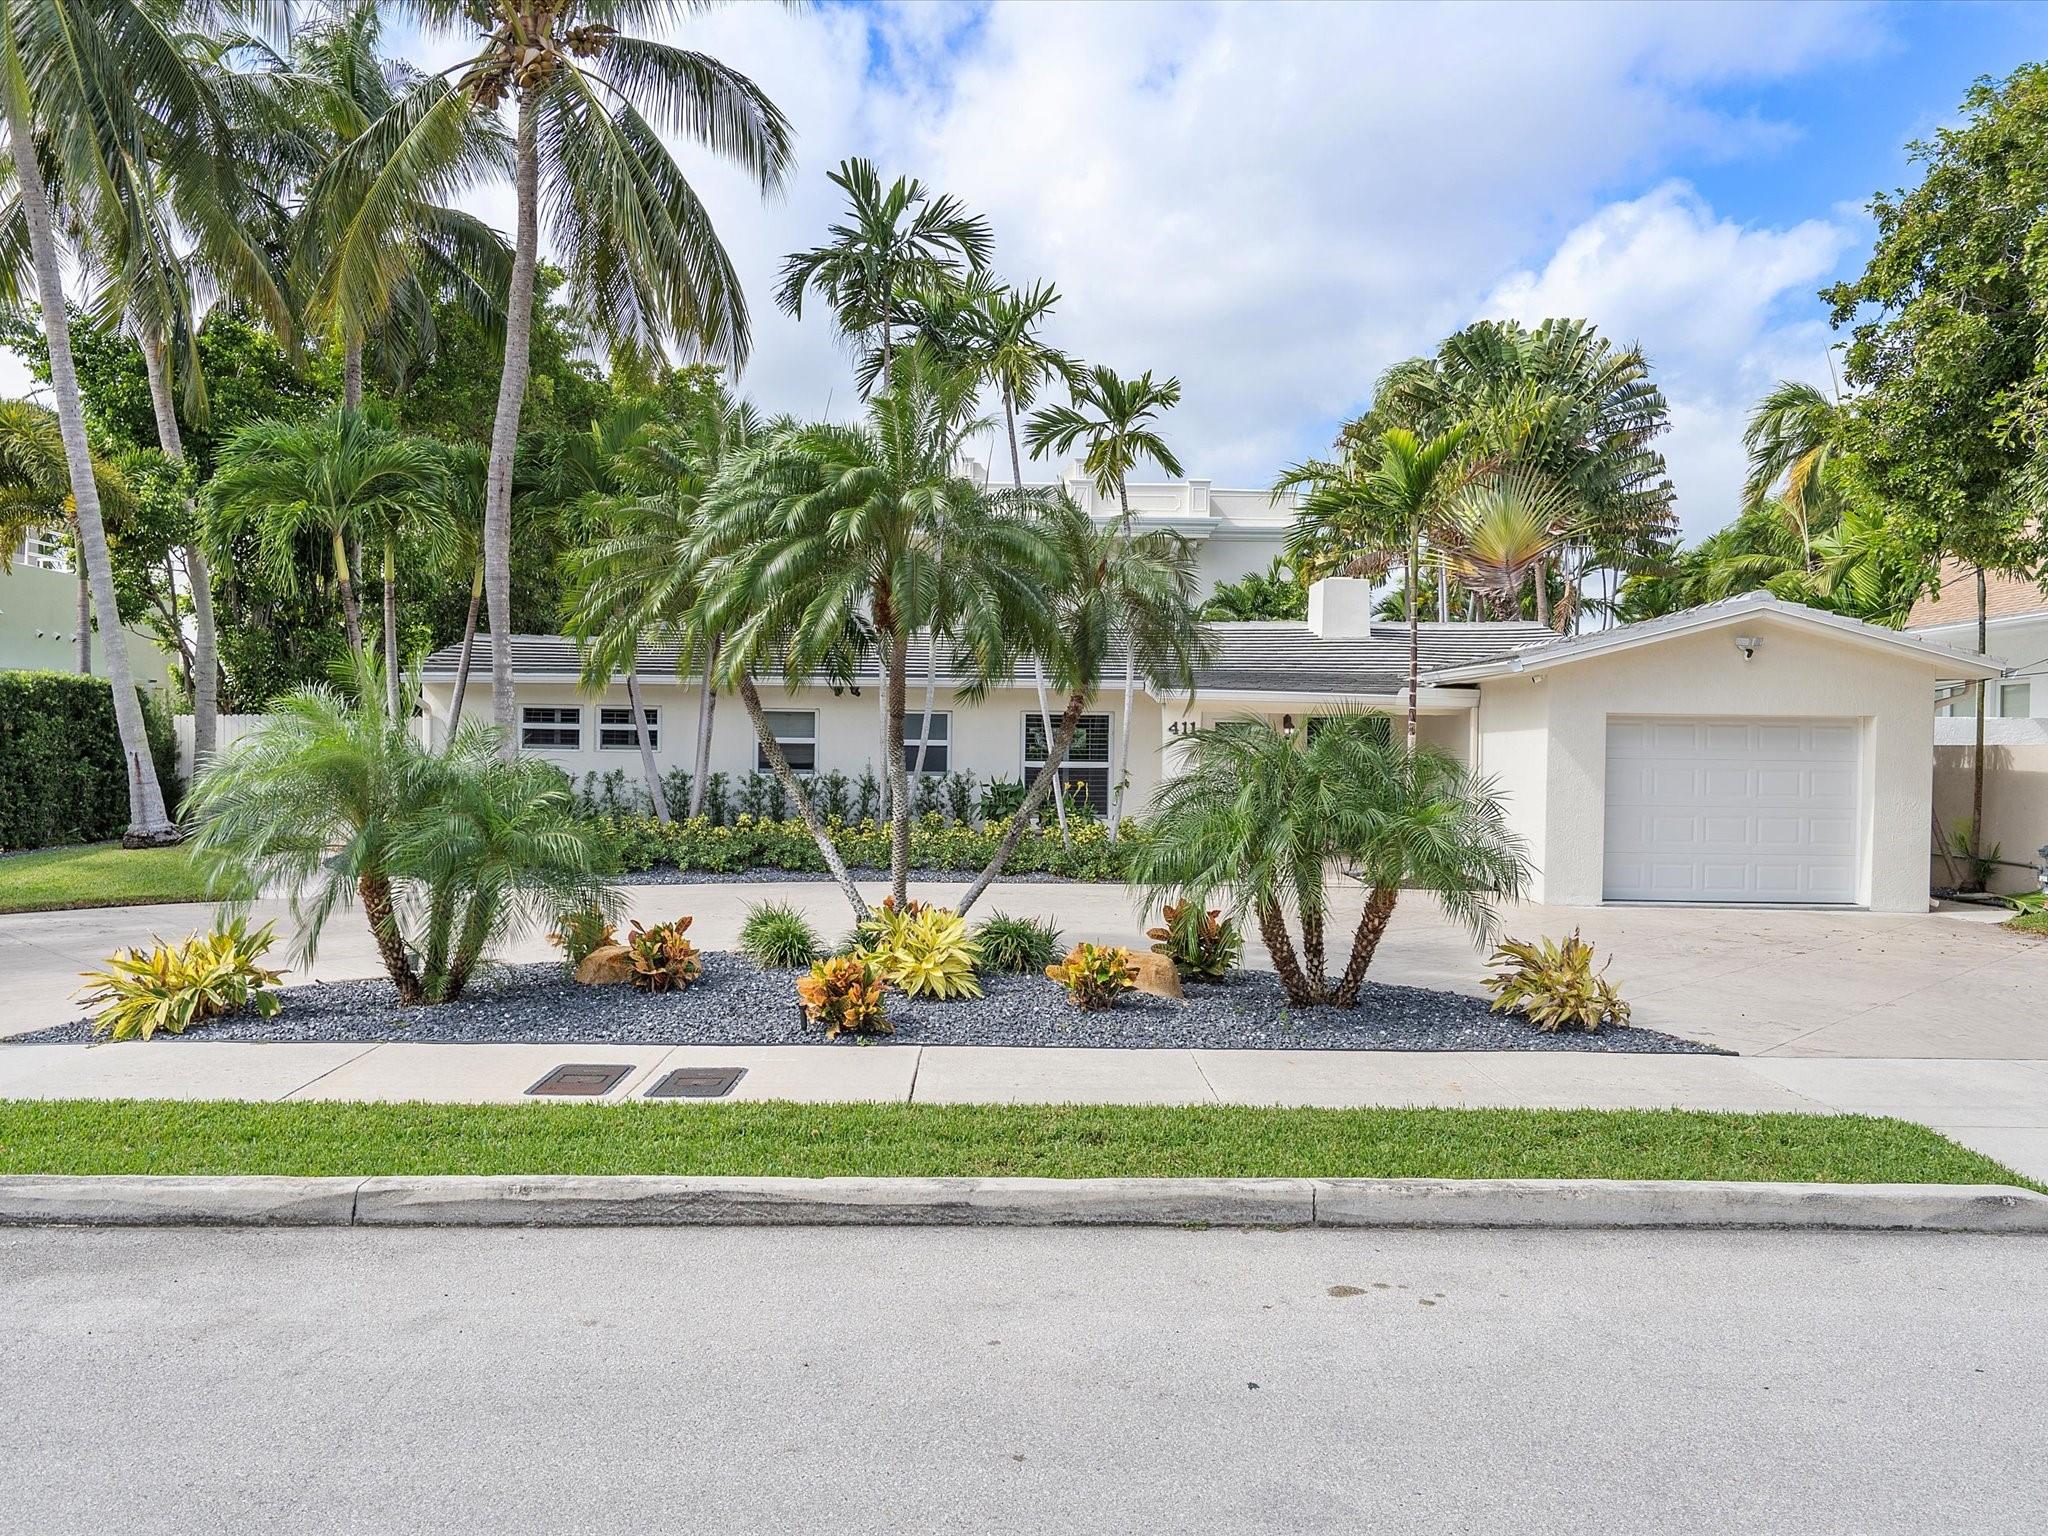 House for Rent in Fort Lauderdale, FL